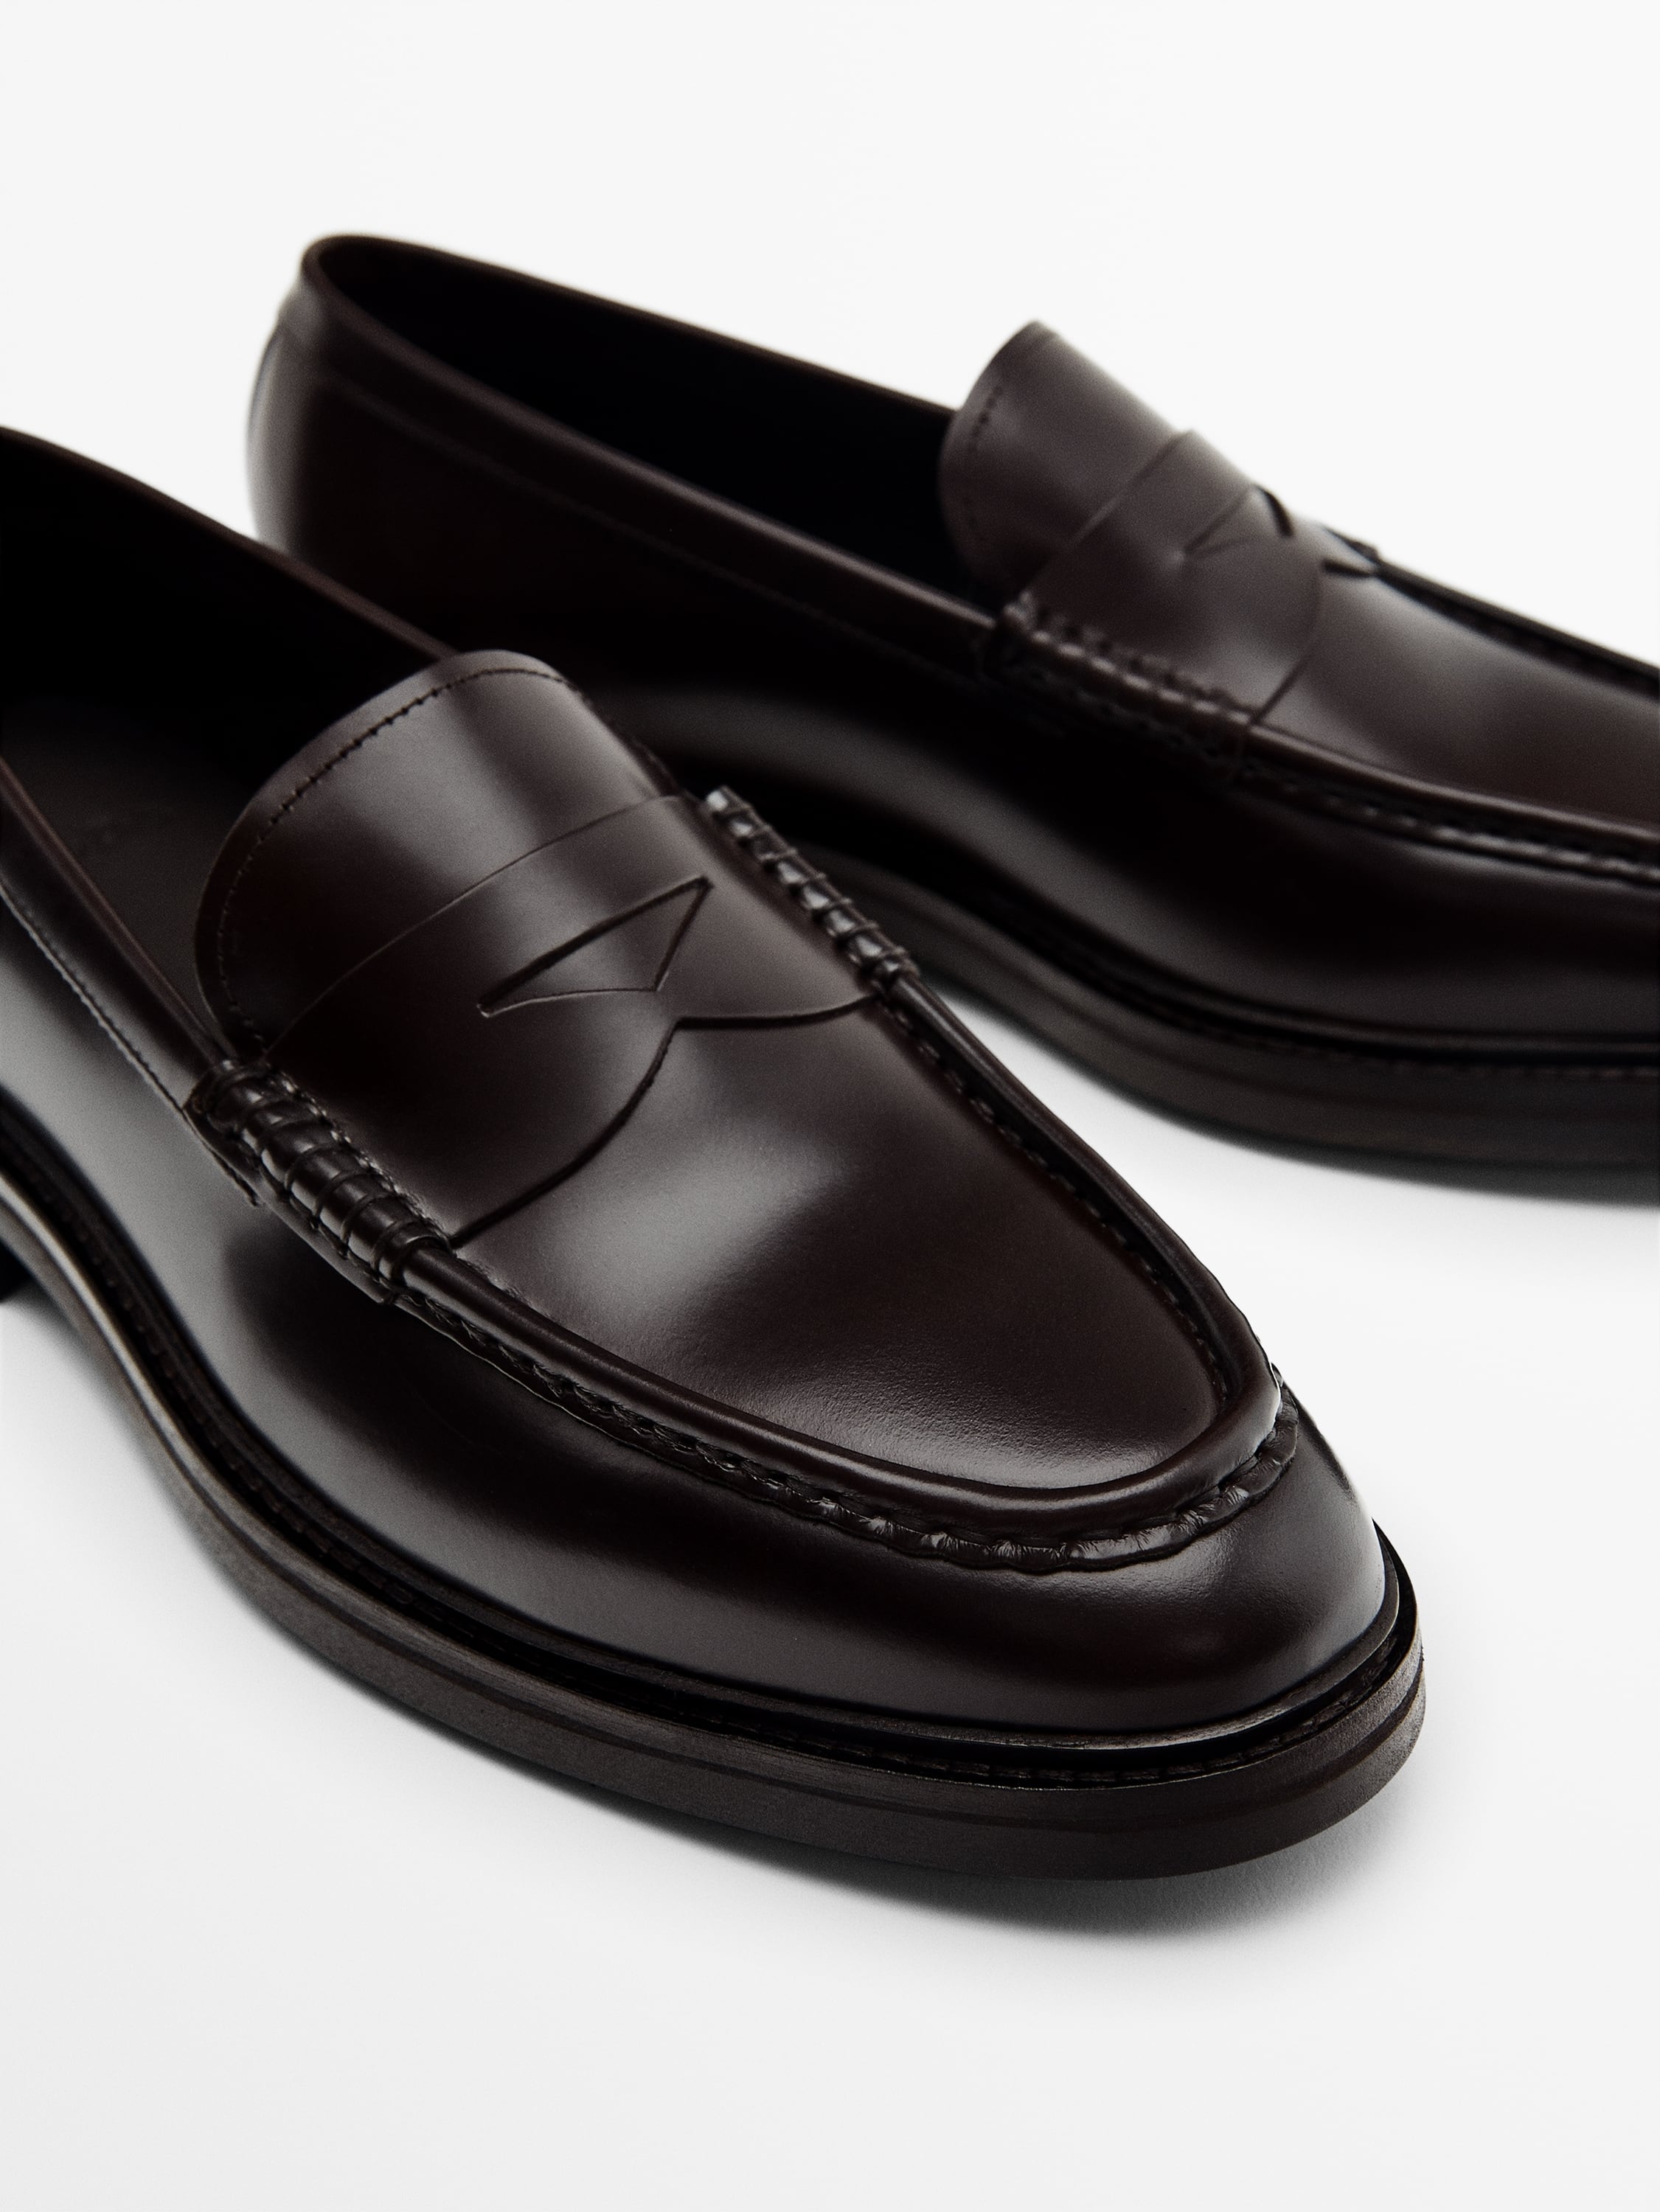 Zara Brown leather penny loafers | Square One